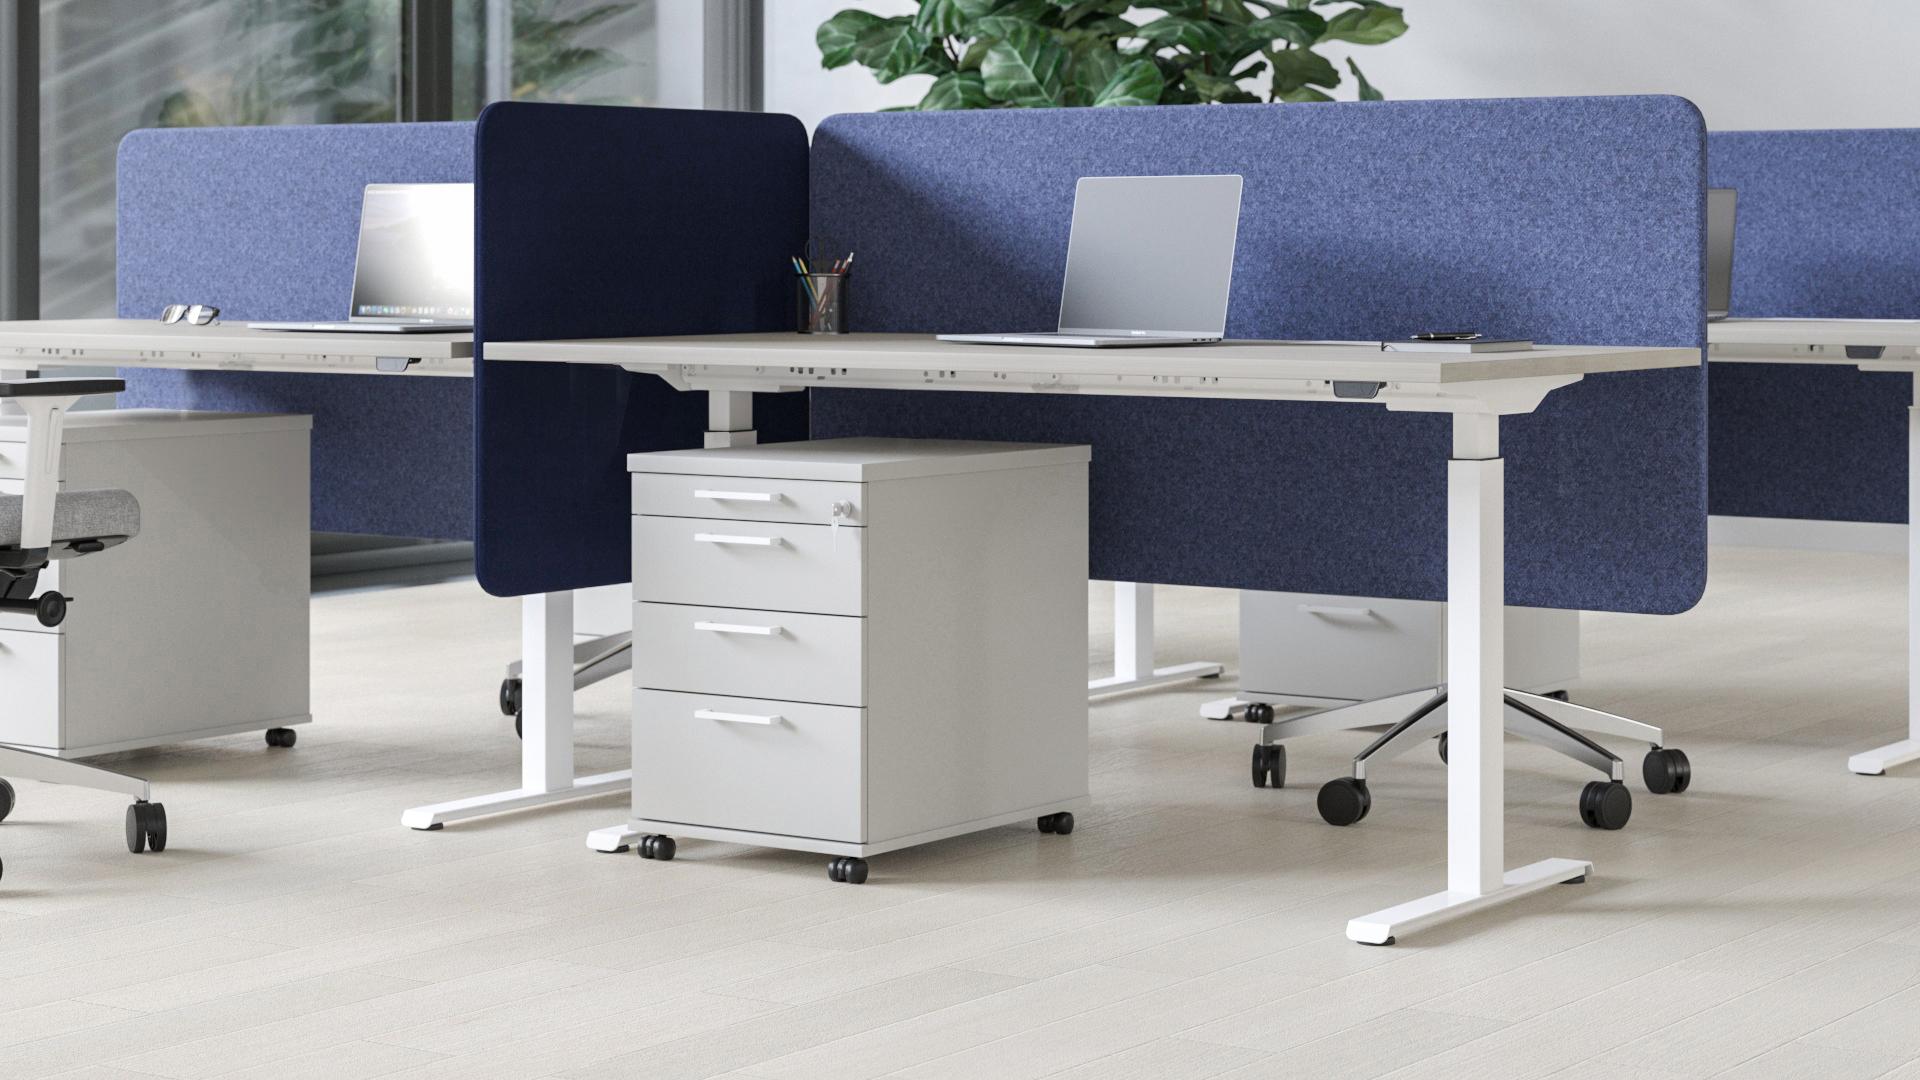 Be Active range of height adjustable Sit-Stand desks with large blue acoustic screens.